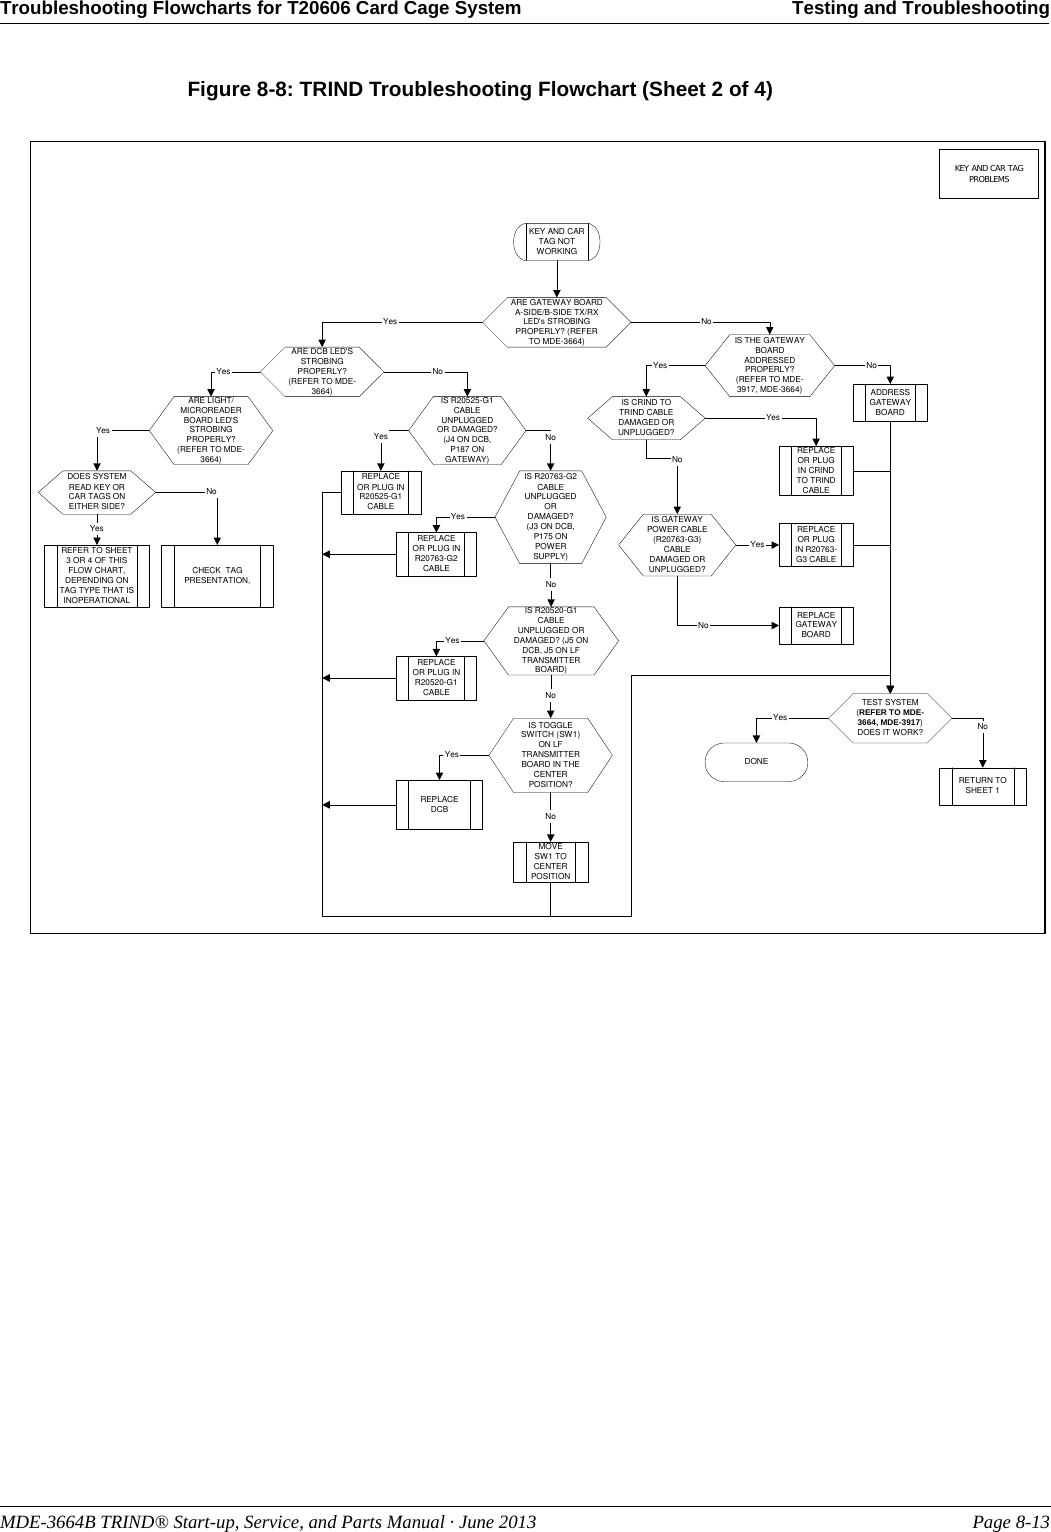 MDE-3664B TRIND® Start-up, Service, and Parts Manual · June 2013 Page 8-13Troubleshooting Flowcharts for T20606 Card Cage System Testing and TroubleshootingFigure 8-8: TRIND Troubleshooting Flowchart (Sheet 2 of 4)KEY AND CAR TAGPROBLEMSKEY AND CARTAG NOTWORKINGARE GATEWAY BOARDA-SIDE/B-SIDE TX/RXLED&apos;s STROBINGPROPERLY? (REFERTO MDE-3664)Yes NoARE DCB LED&apos;SSTROBINGPROPERLY?(REFER TO MDE-3664)IS THE GATEWAYBOARDADDRESSEDPROPERLY?(REFER TO MDE-3917, MDE-3664)Yes No Yes NoARE LIGHT/MICROREADERBOARD LED&apos;SSTROBINGPROPERLY?(REFER TO MDE-3664)IS R20525-G1CABLEUNPLUGGEDOR DAMAGED?(J4 ON DCB,P187 ONGATEWAY)IS CRIND TOTRIND CABLEDAMAGED ORUNPLUGGED?ADDRESSGATEWAYBOARDREPLACEOR PLUGIN CRINDTO TRINDCABLEYesREPLACEOR PLUG INR20525-G1CABLEYesYesDOES SYSTEMREAD KEY ORCAR TAGS ONEITHER SIDE?YesREFER TO SHEET3 OR 4 OF THISFLOW CHART,DEPENDING ONTAG TYPE THAT ISINOPERATIONALNoNoCHECK  TAGPRESENTATION,IS R20763-G2CABLEUNPLUGGEDORDAMAGED?(J3 ON DCB,P175 ONPOWERSUPPLY)REPLACEOR PLUG INR20763-G2CABLEYesREPLACEOR PLUGIN R20763-G3 CABLENoIS R20520-G1CABLEUNPLUGGED ORDAMAGED? (J5 ONDCB, J5 ON LFTRANSMITTERBOARD)REPLACEOR PLUG INR20520-G1CABLEYesNoNoIS TOGGLESWITCH (SW1)ON LFTRANSMITTERBOARD IN THECENTERPOSITION?NoMOVESW1 TOCENTERPOSITIONYesREPLACEDCBTEST SYSTEM(REFER TO MDE-3664, MDE-3917)DOES IT WORK?Yes NoDONERETURN TOSHEET 1REPLACEGATEWAYBOARDIS GATEWAYPOWER CABLE(R20763-G3)CABLEDAMAGED ORUNPLUGGED?YesNo